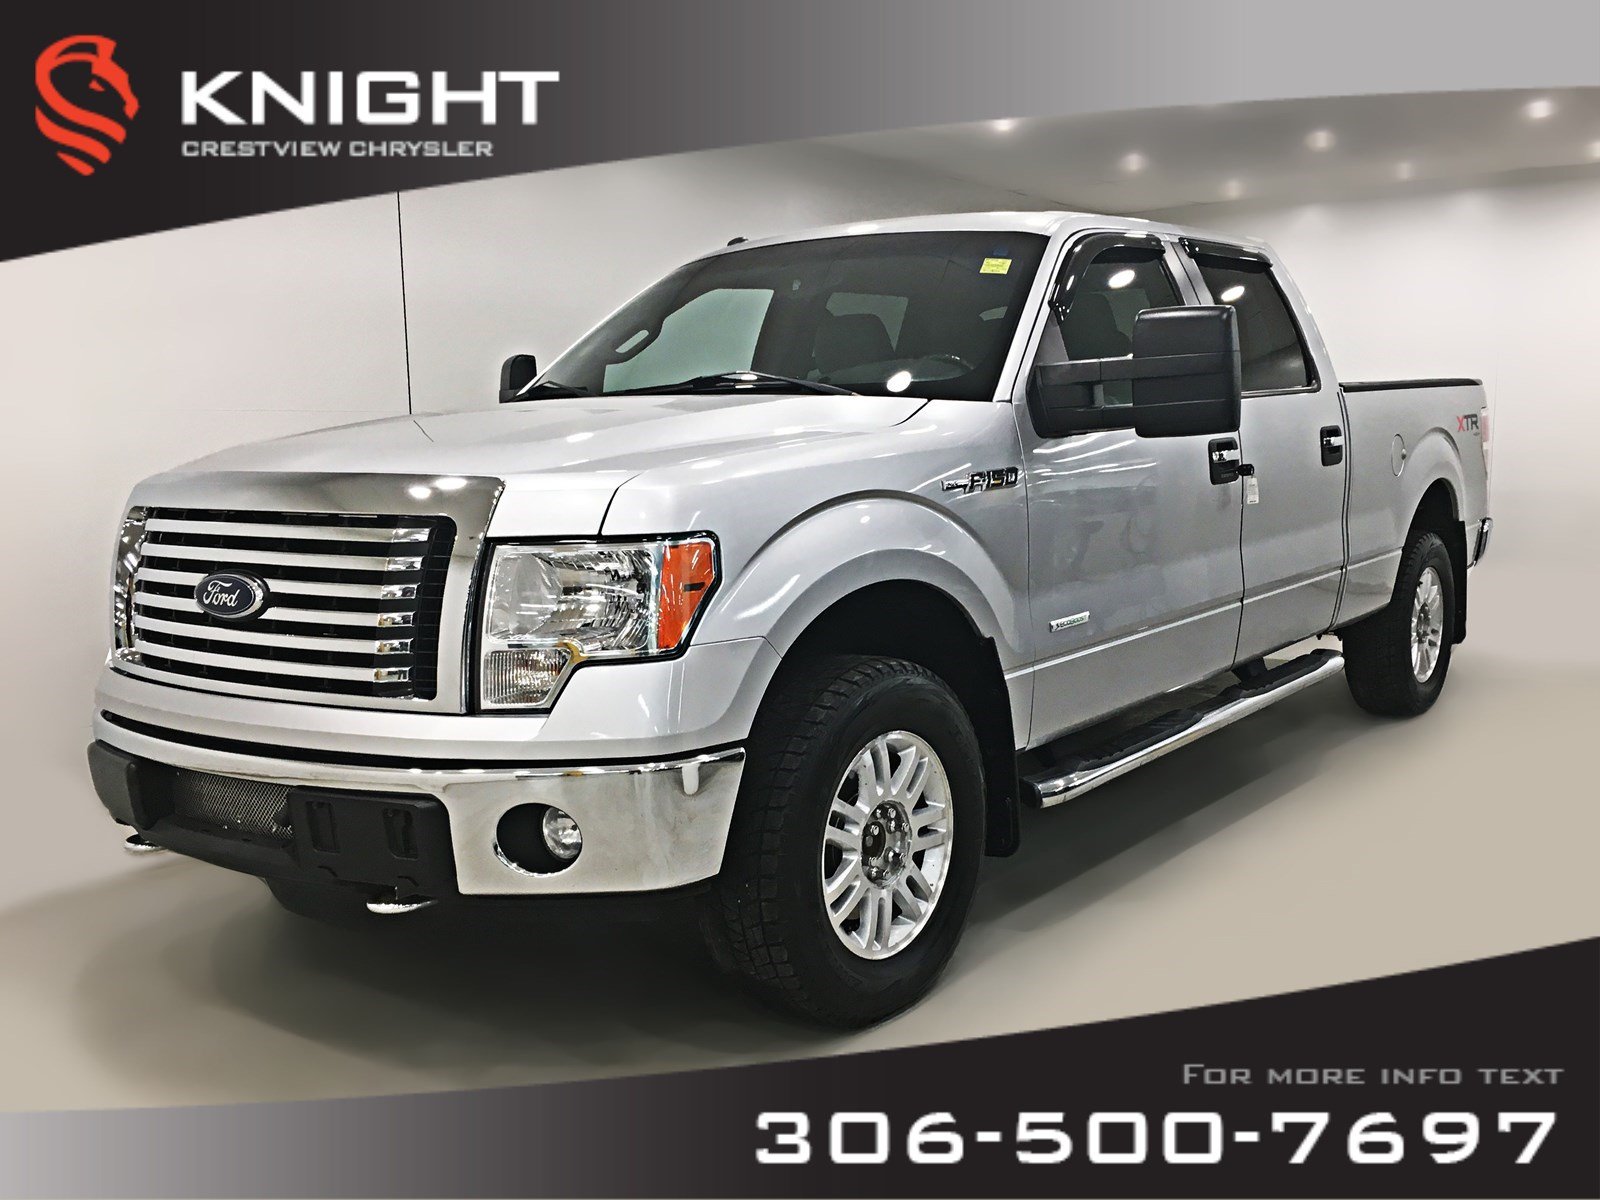 Used 2011 Ford F-150 XLT XTR SuperCrew Crew Cab Pickup near Moose Jaw 2011 Ford F150 Xlt 5.0 Towing Capacity